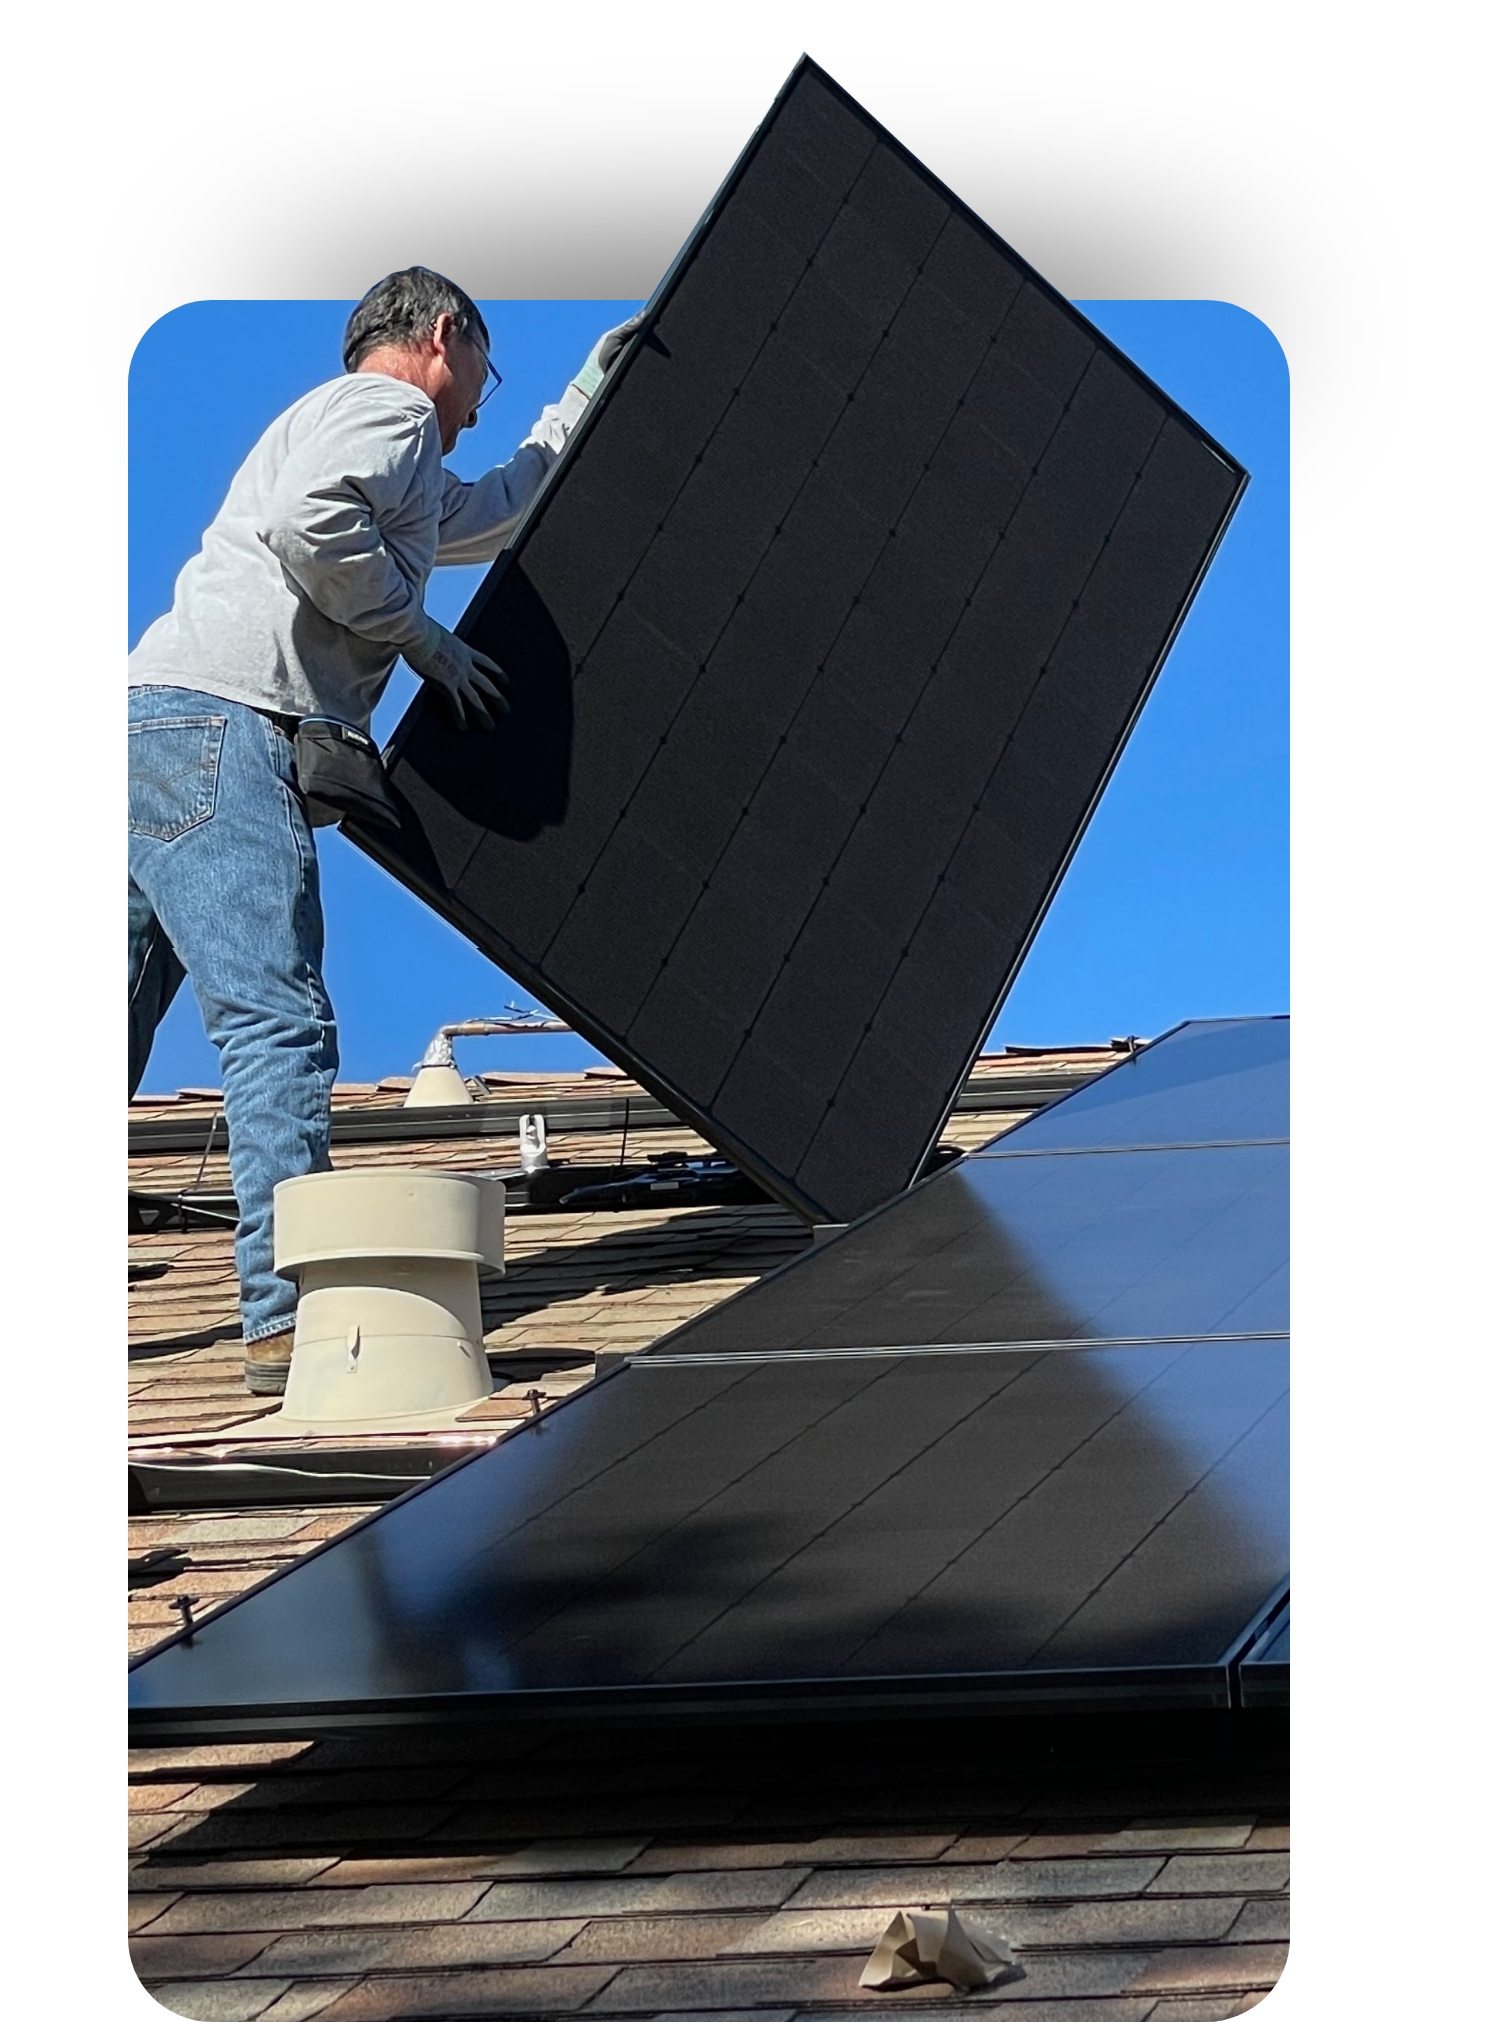 As a local solar company in Highlands Ranch, CO, our solar installation services are second to none.